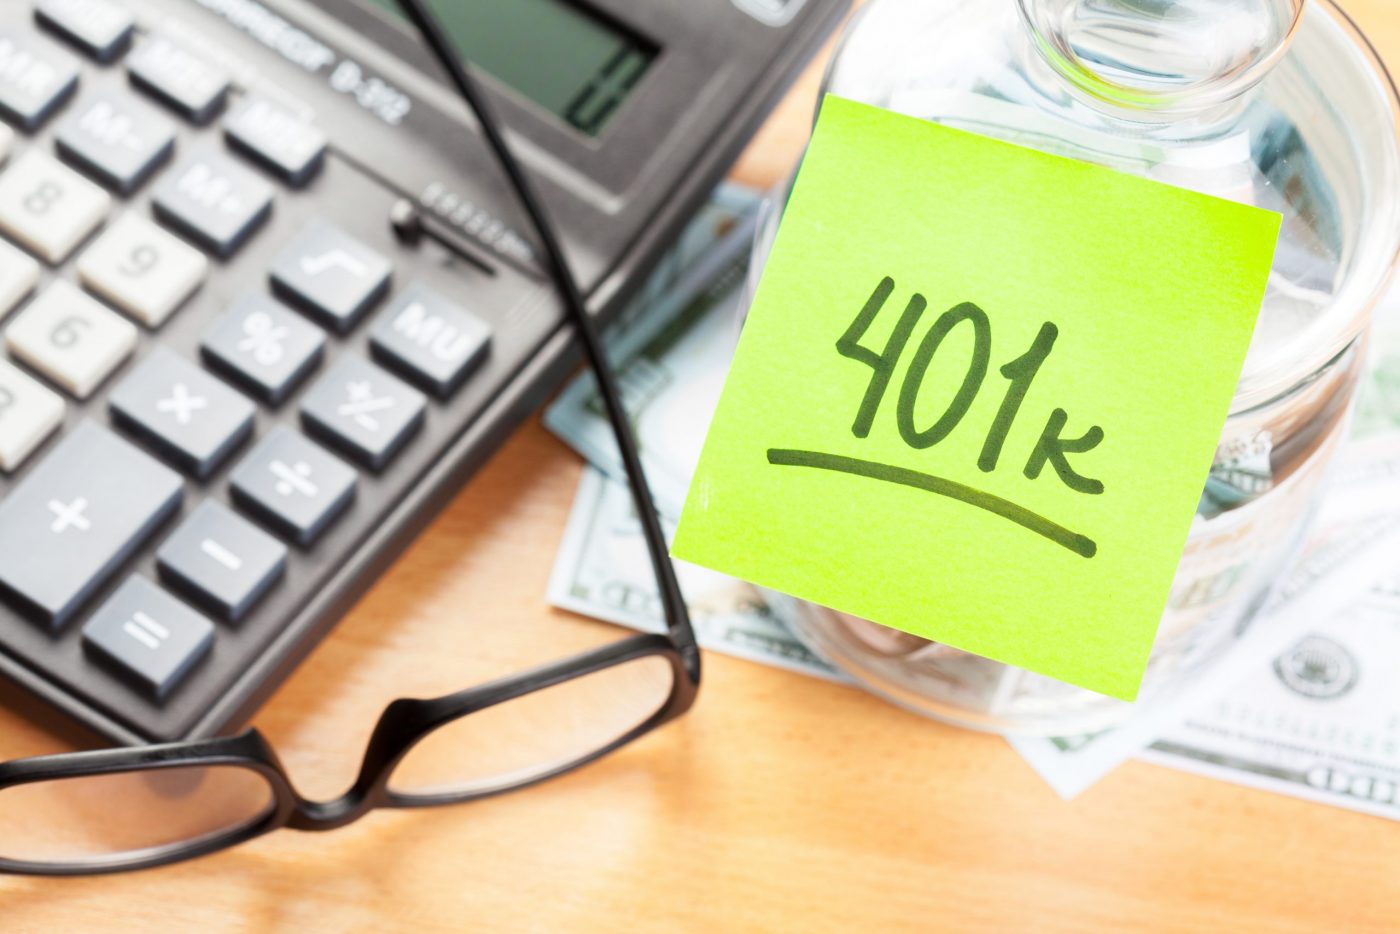 7 Tips On How To Leverage Your 401(k) As You Near Retirement